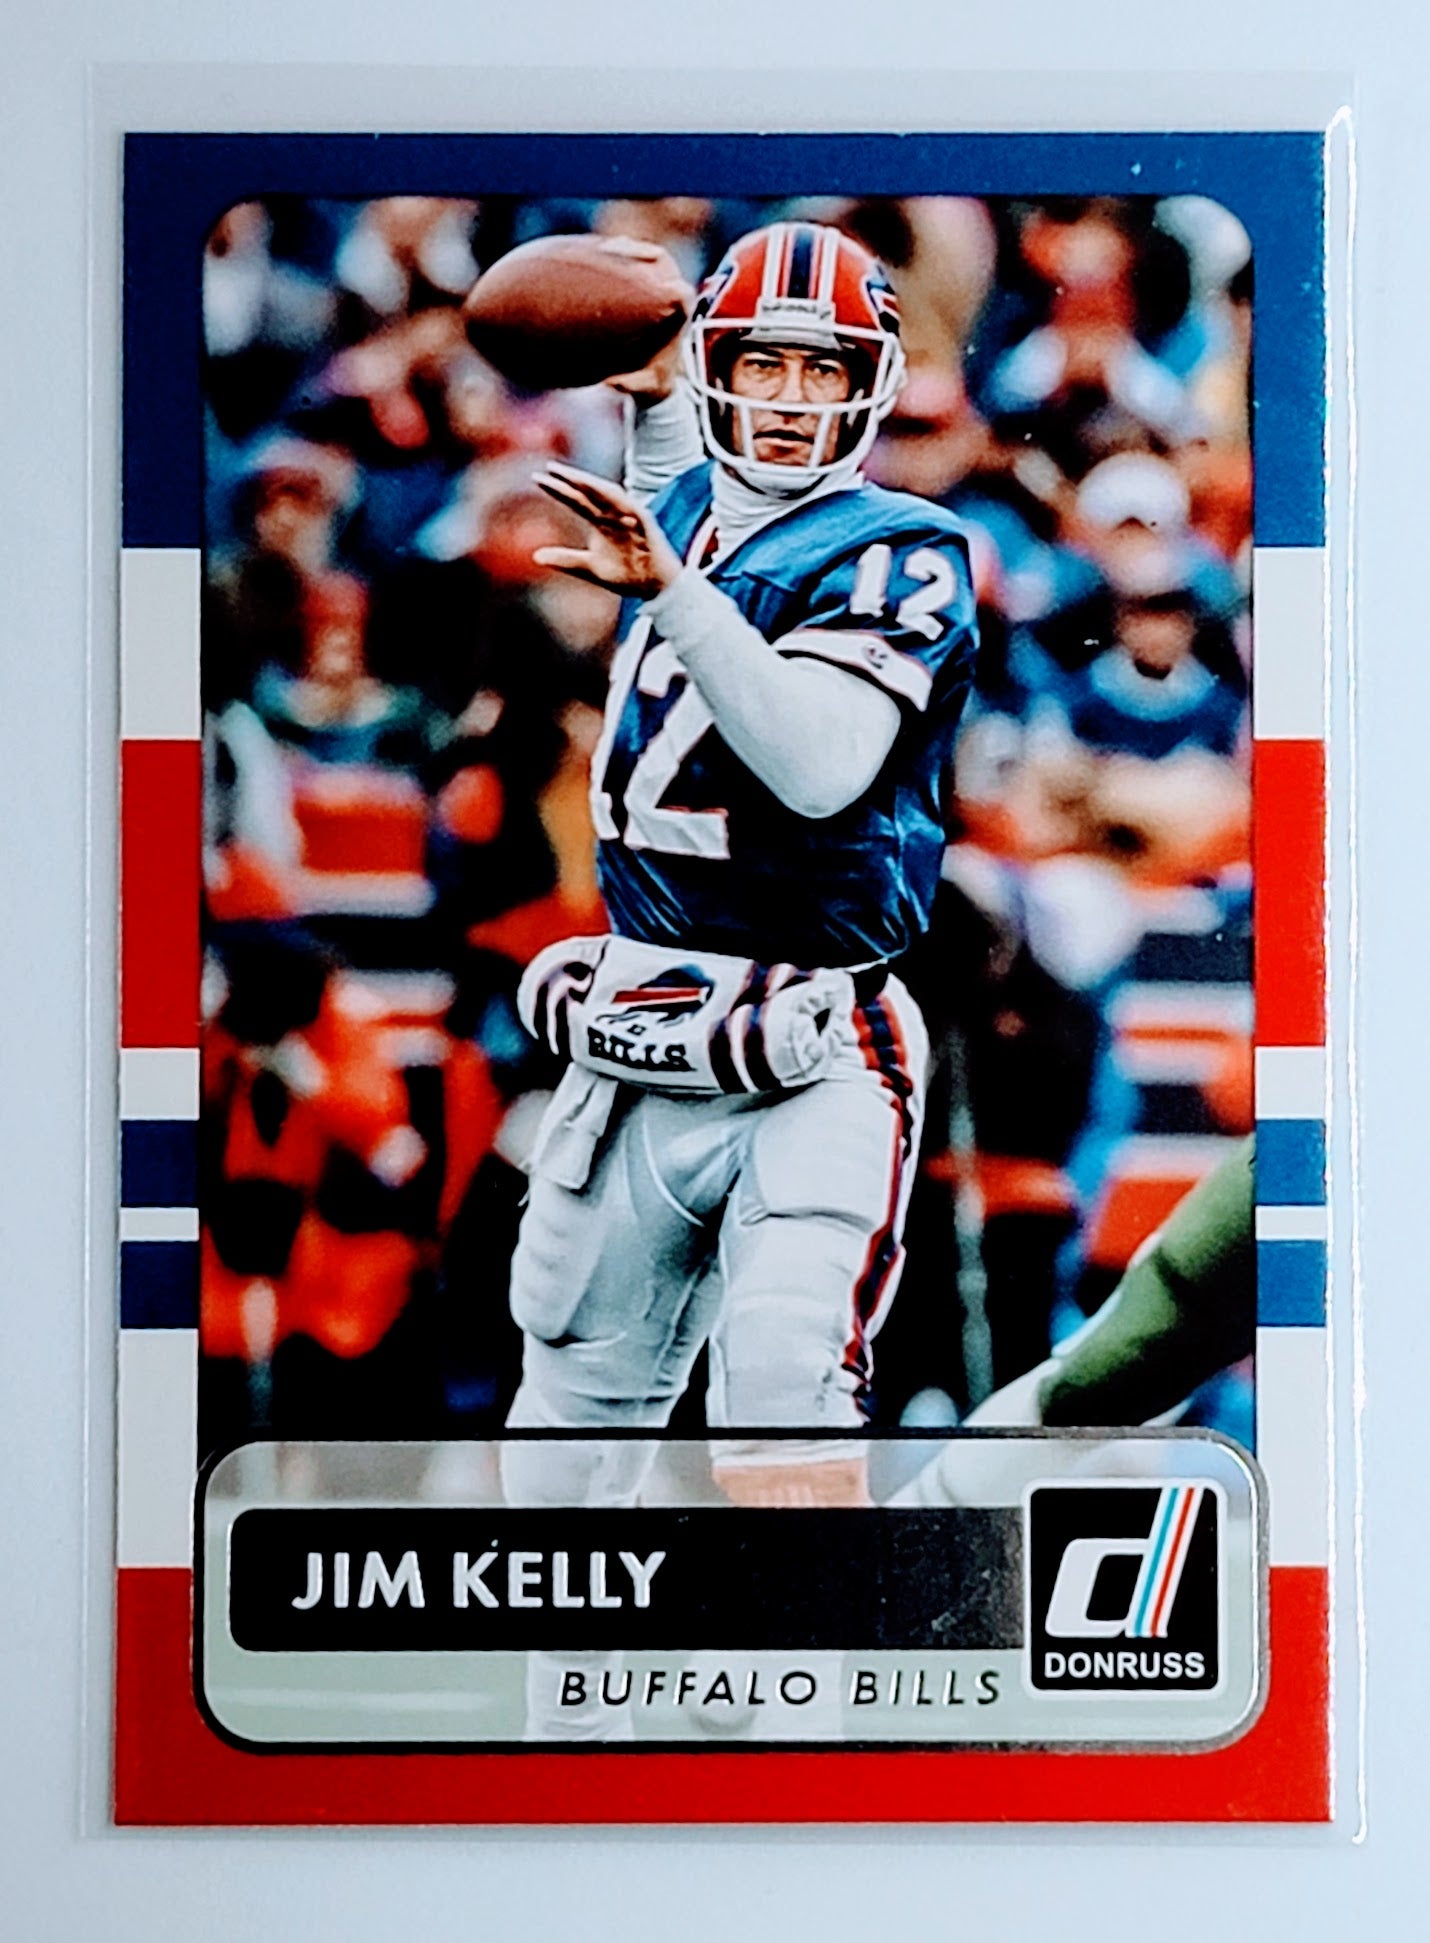 2015 Donruss Jim Kelly   Football Card  TH13C simple Xclusive Collectibles   